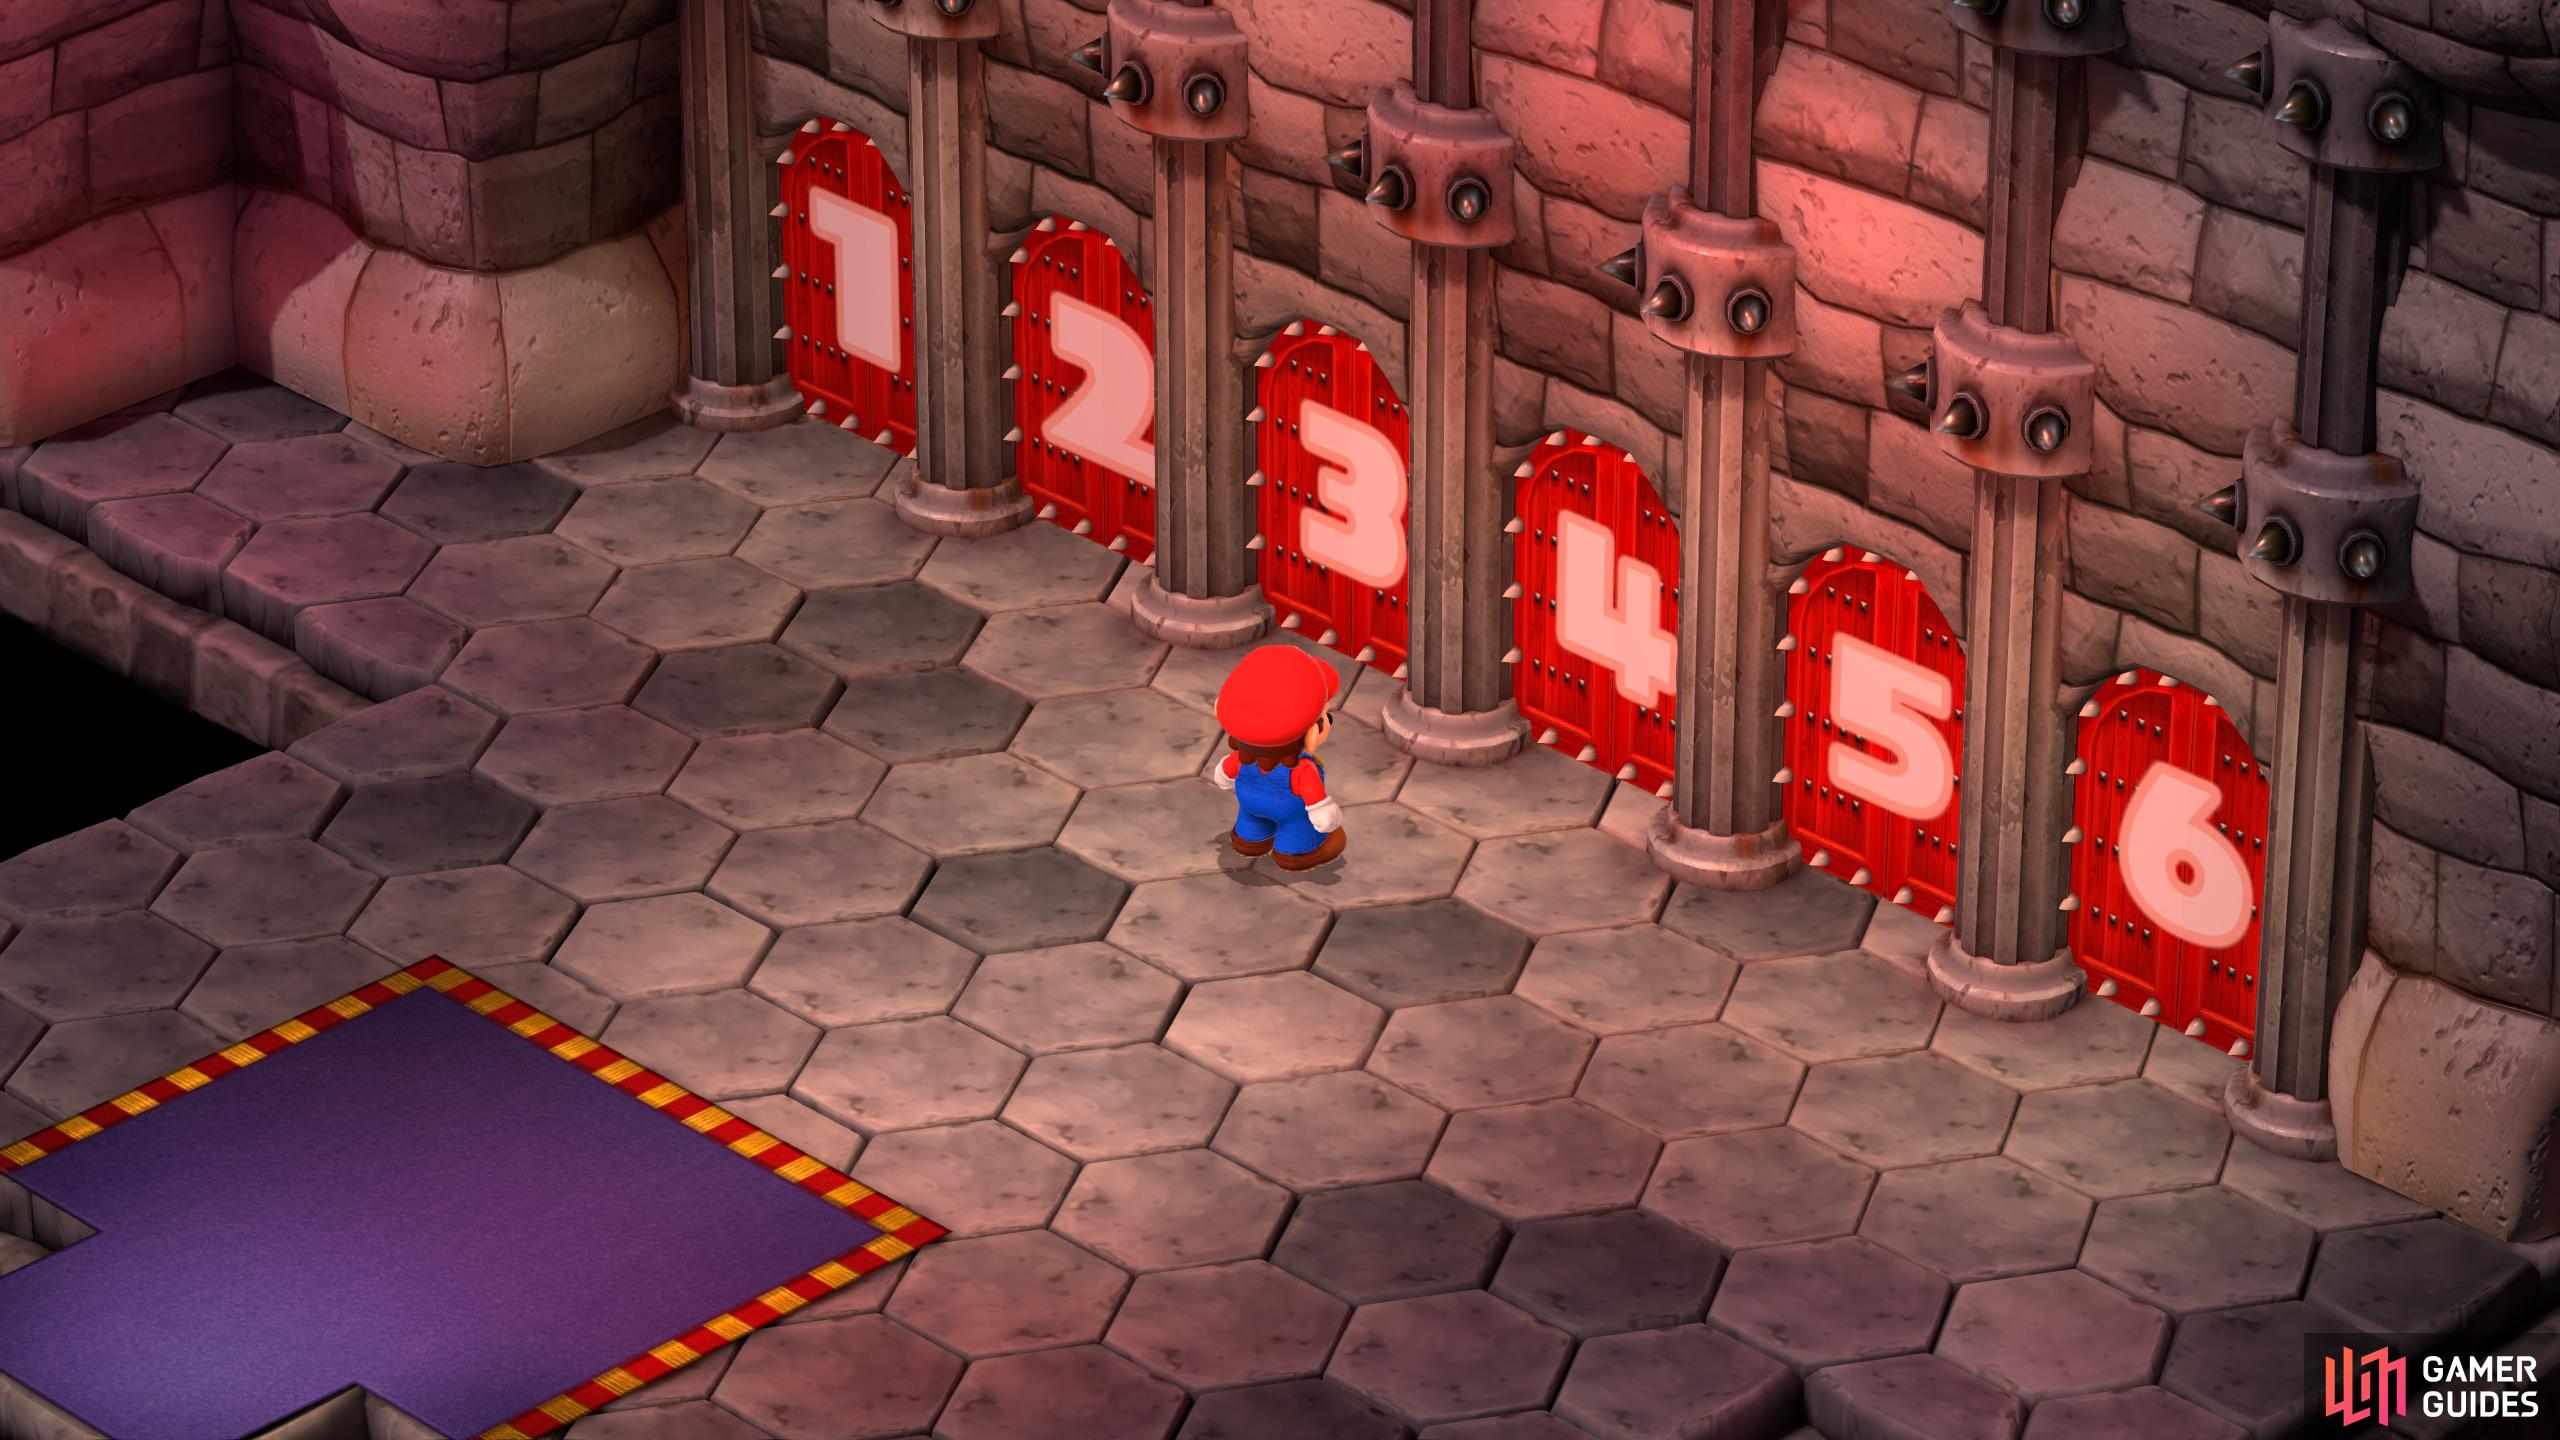 In Bowser's Keep, there are six doors, all with puzzles, battles, or platforming. Four of these doors reward you with a weapon.